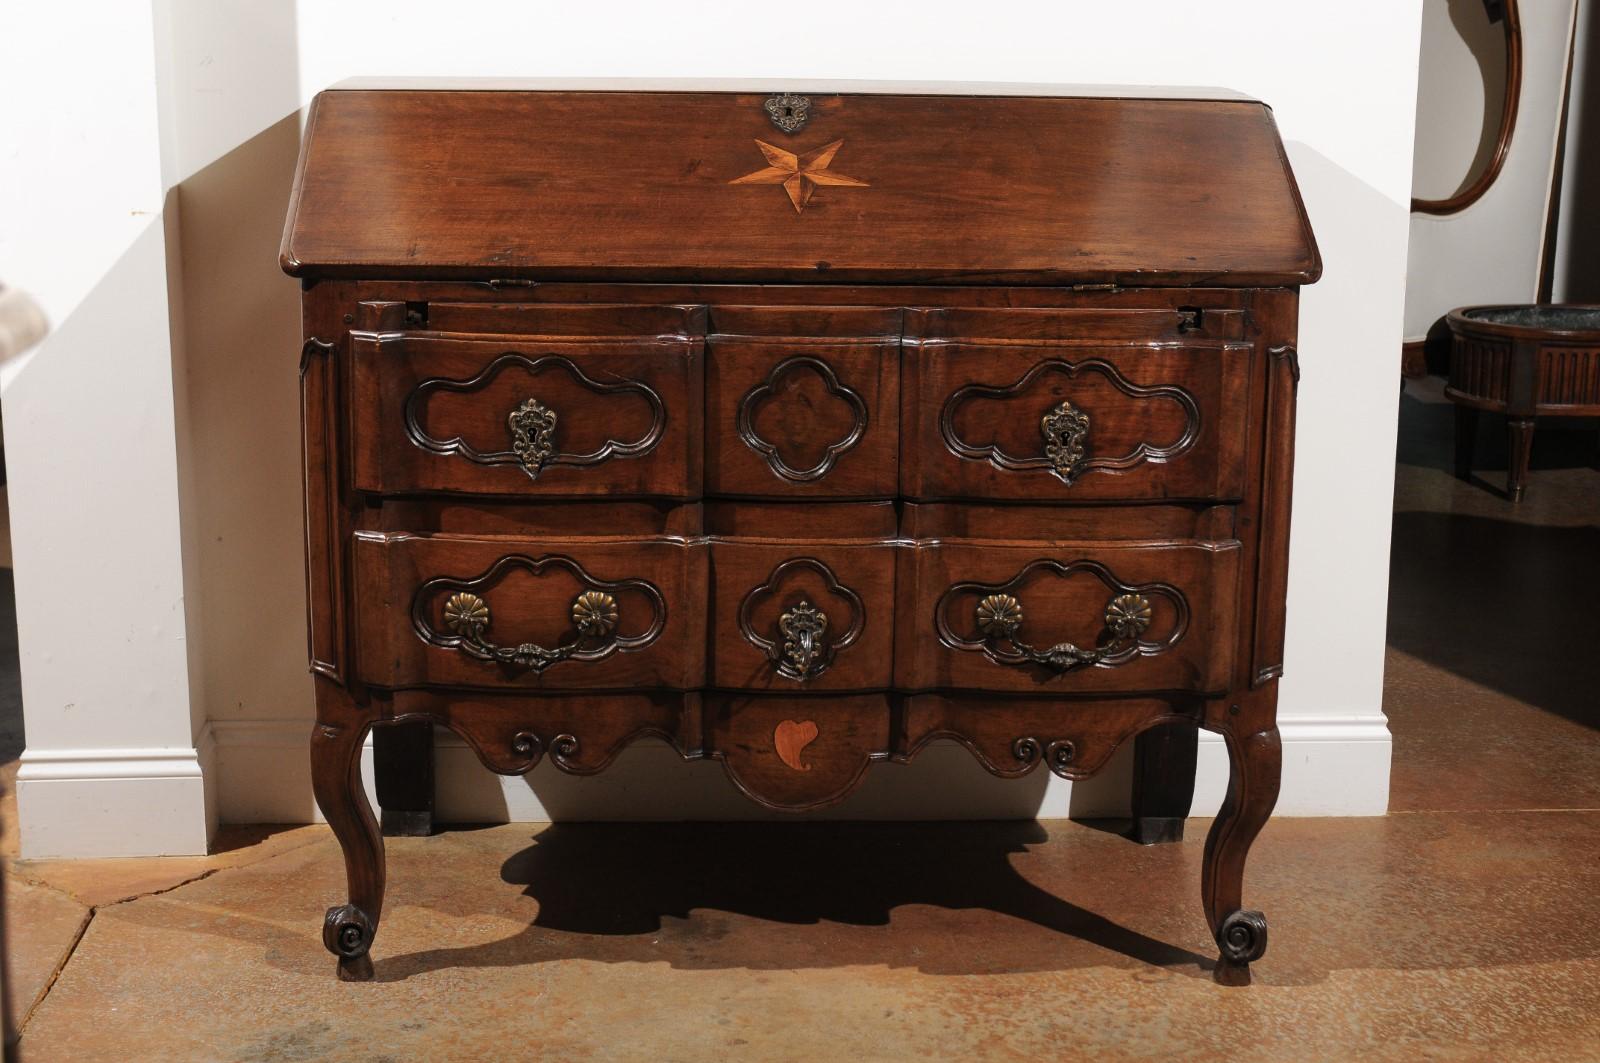 A French Louis XV period walnut slant-front desk on commode from the 18th century, with star inlay, crossbow front and quadrilobe motifs. Born in France during the 18th century, this exquisite walnut desk features a slant-front bureau, adorned in